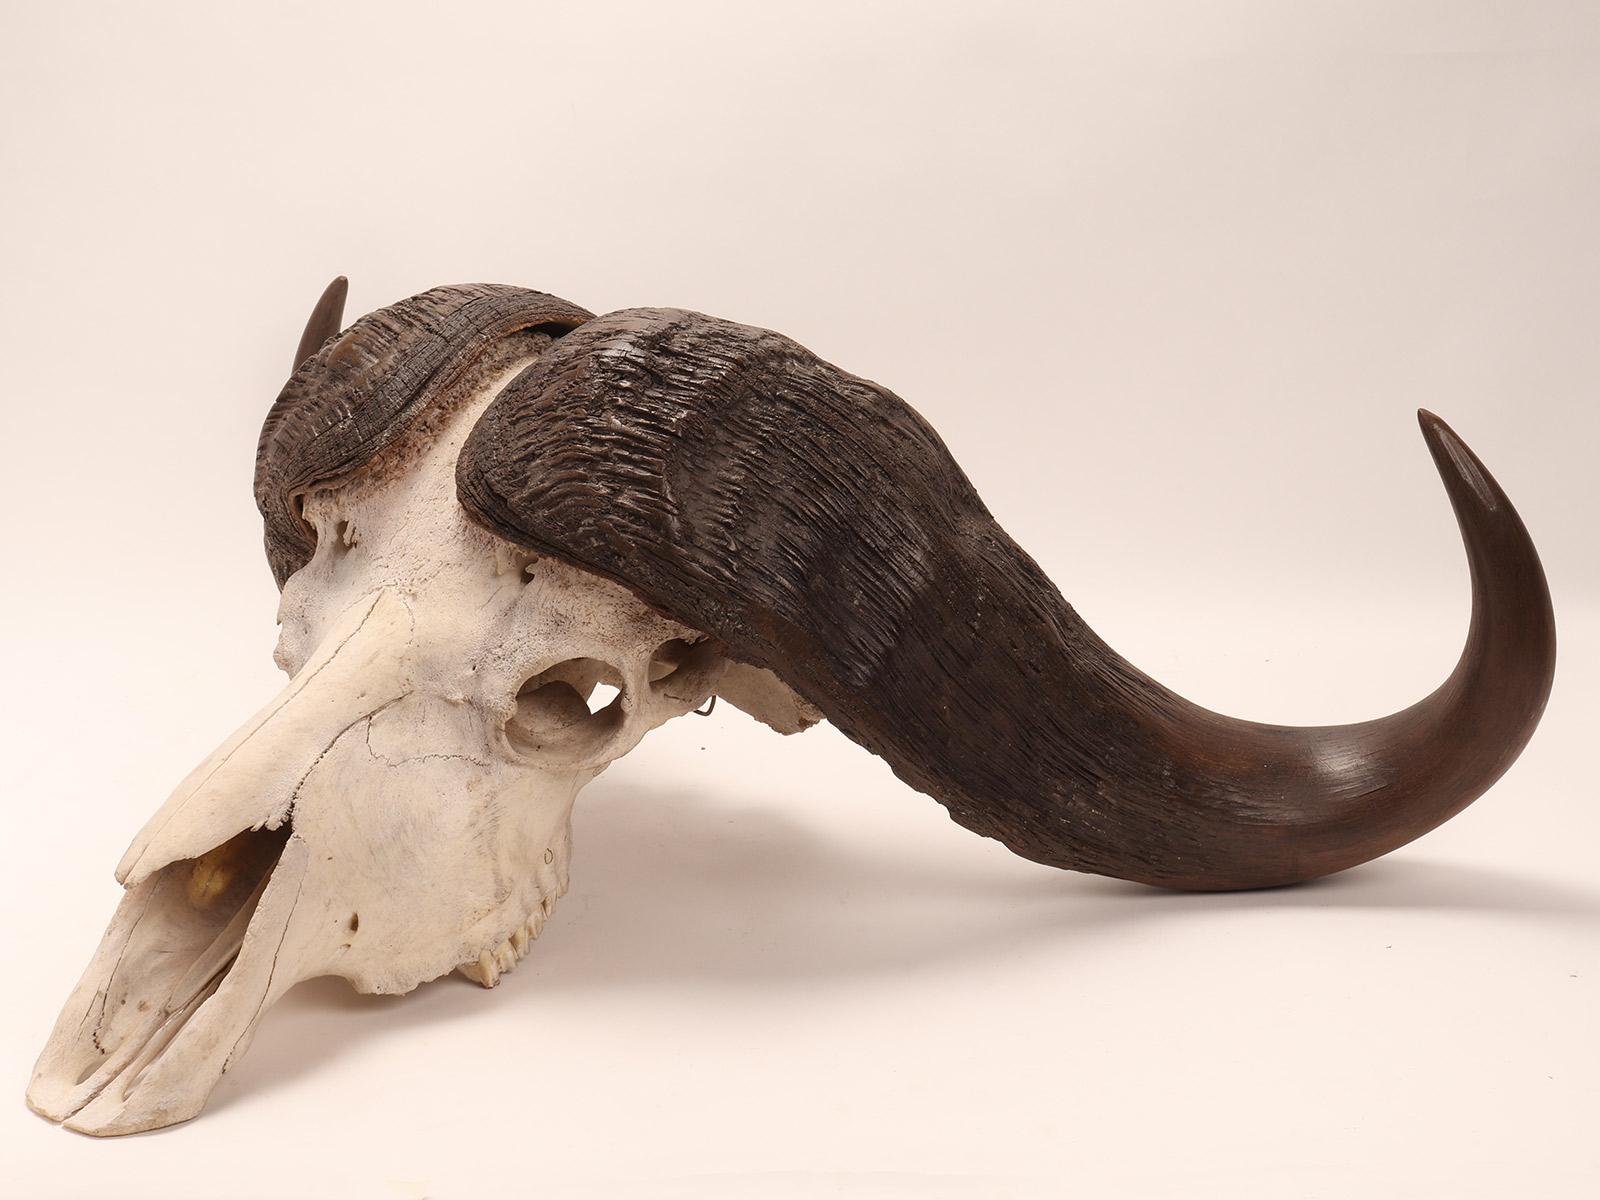 19th Century Natural Specimen a Trophy of a Bufalo Skull, Africa, 1890